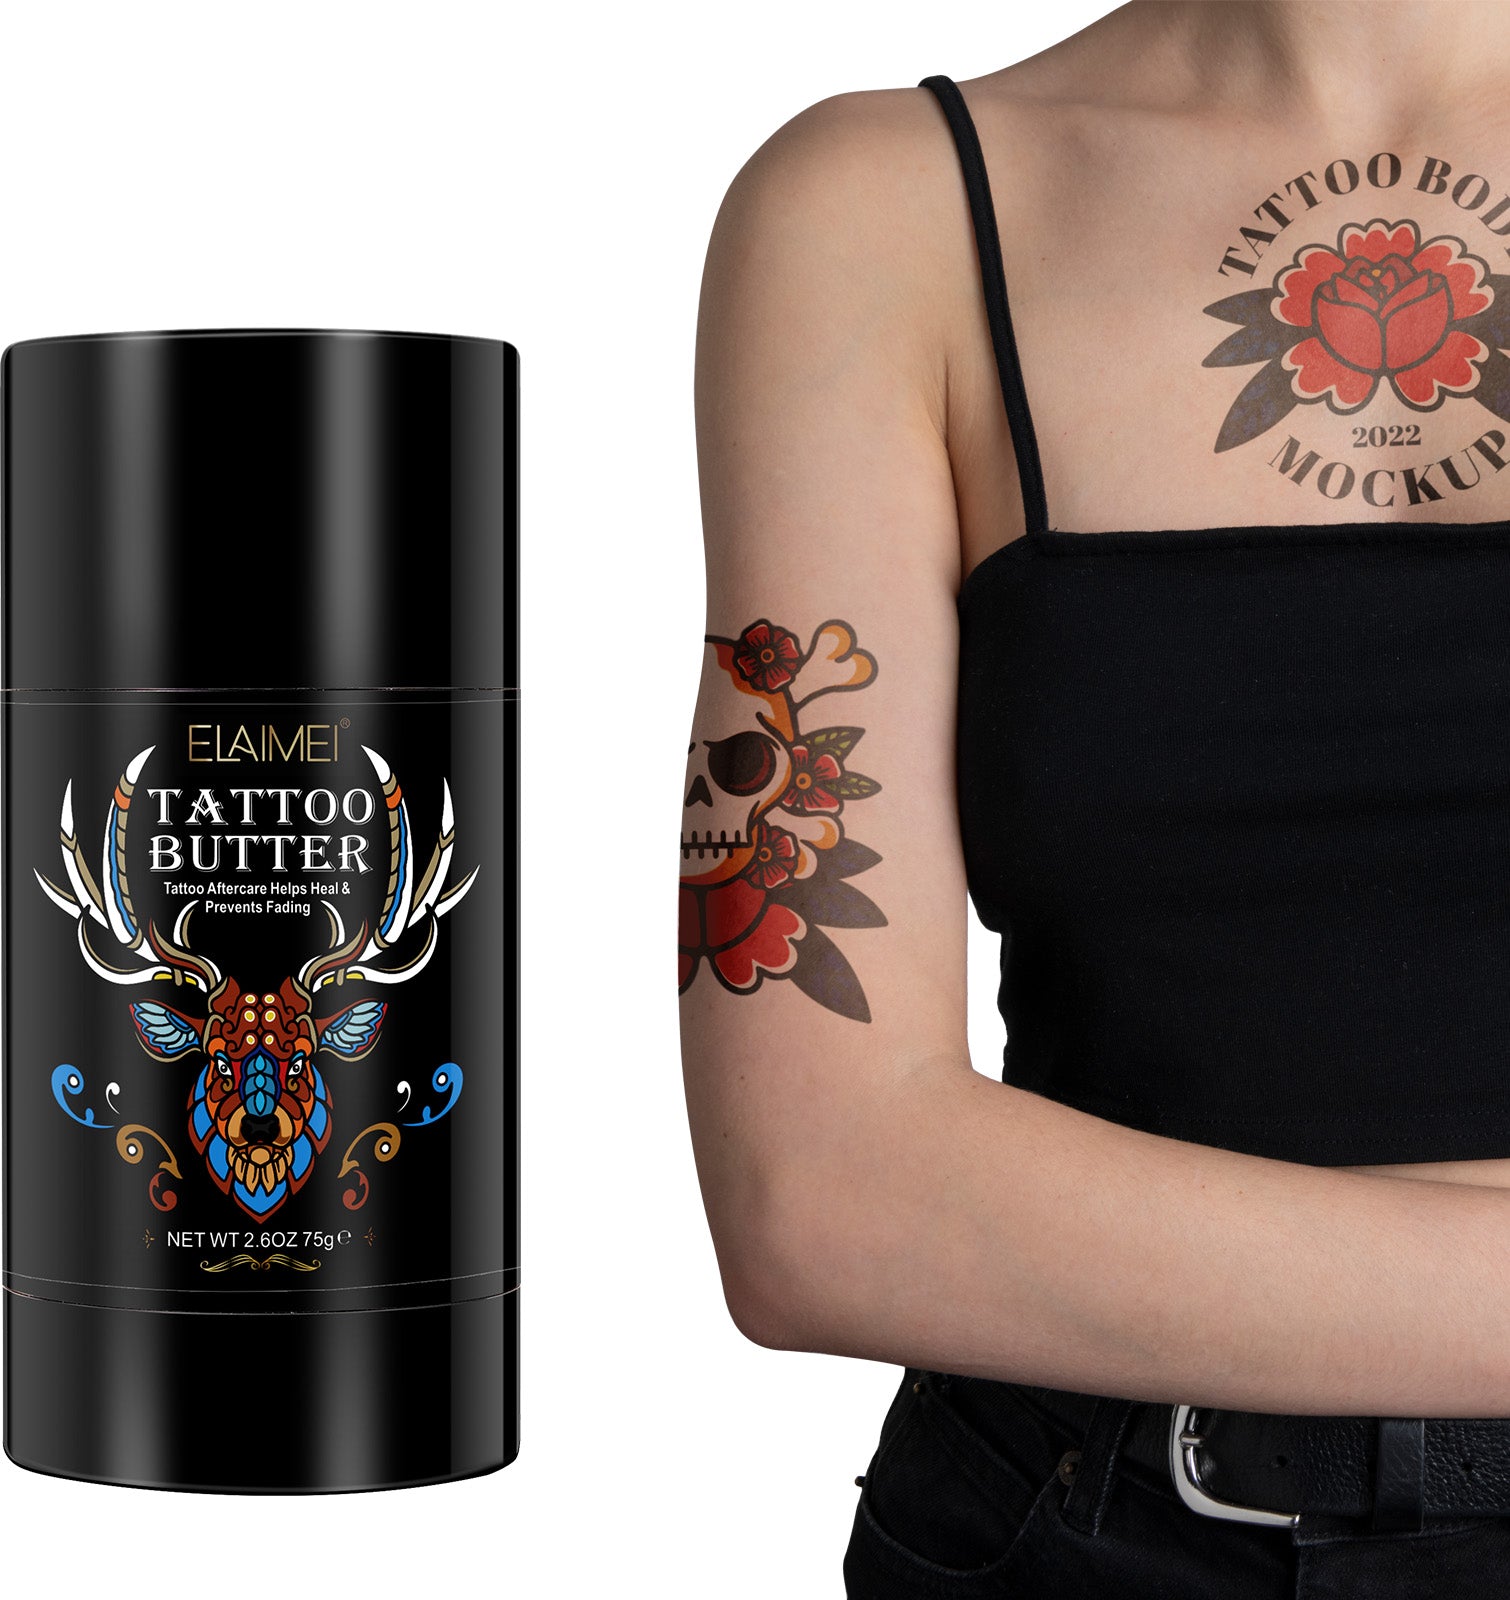 Tattoo Aftercare - YouTube